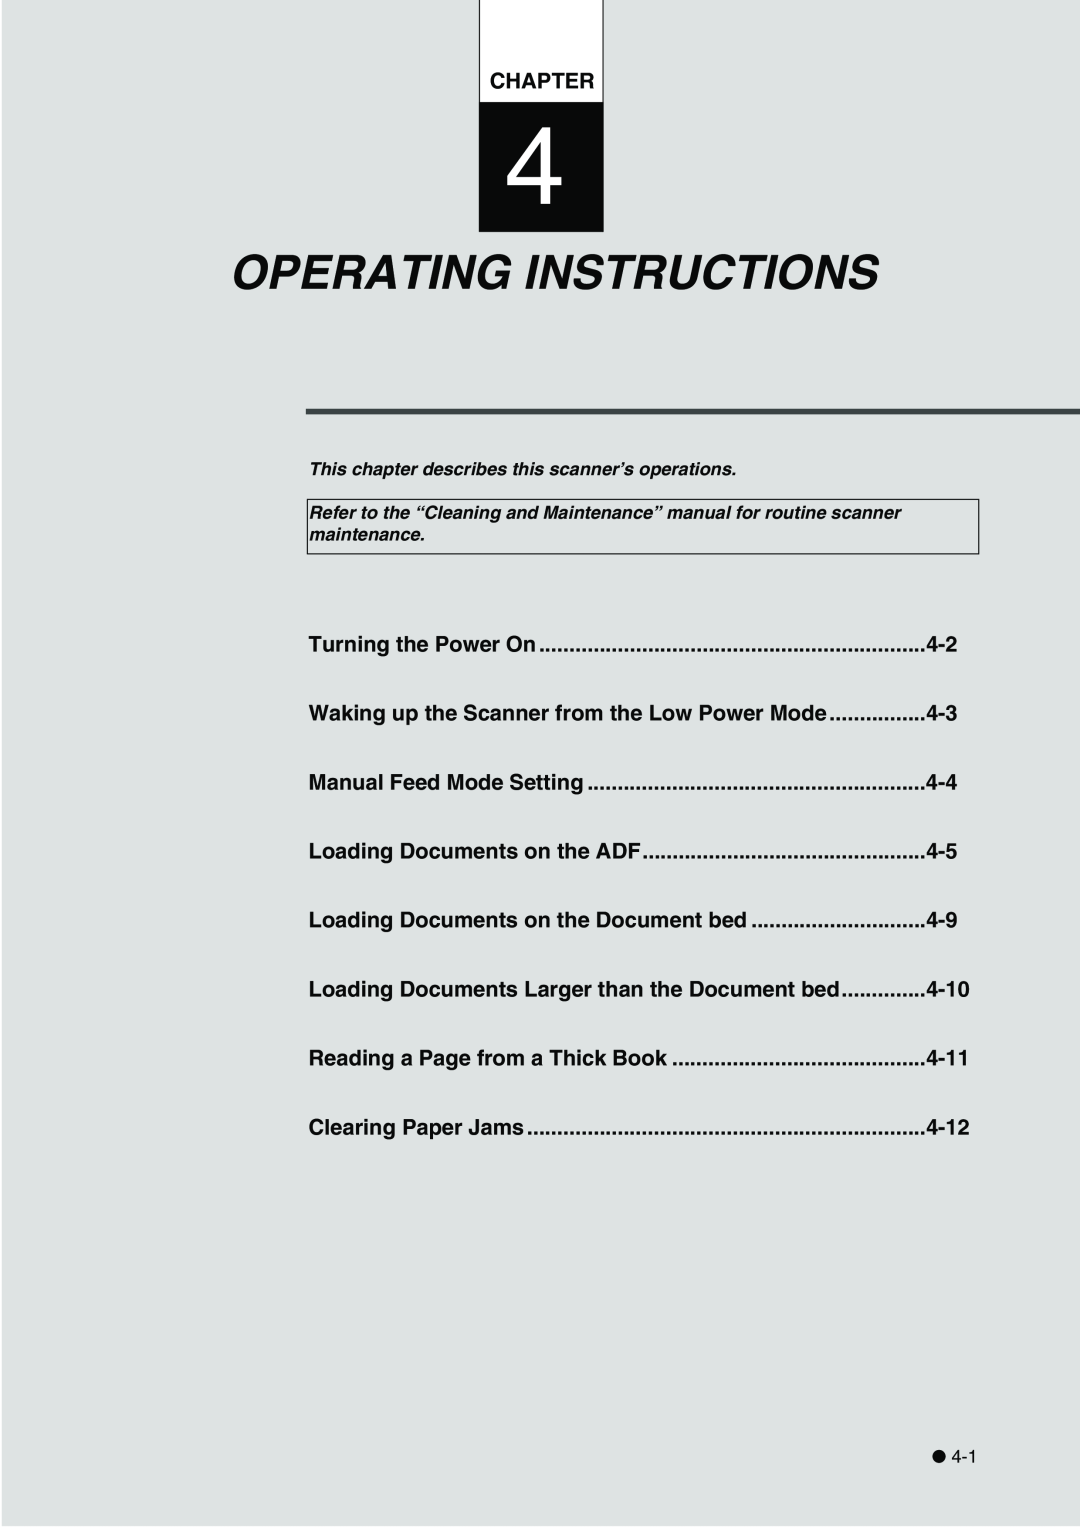 Fujitsu fi-4340C Operating Instructions, Chapter, Turning the Power On, Waking up the Scanner from the Low Power Mode 